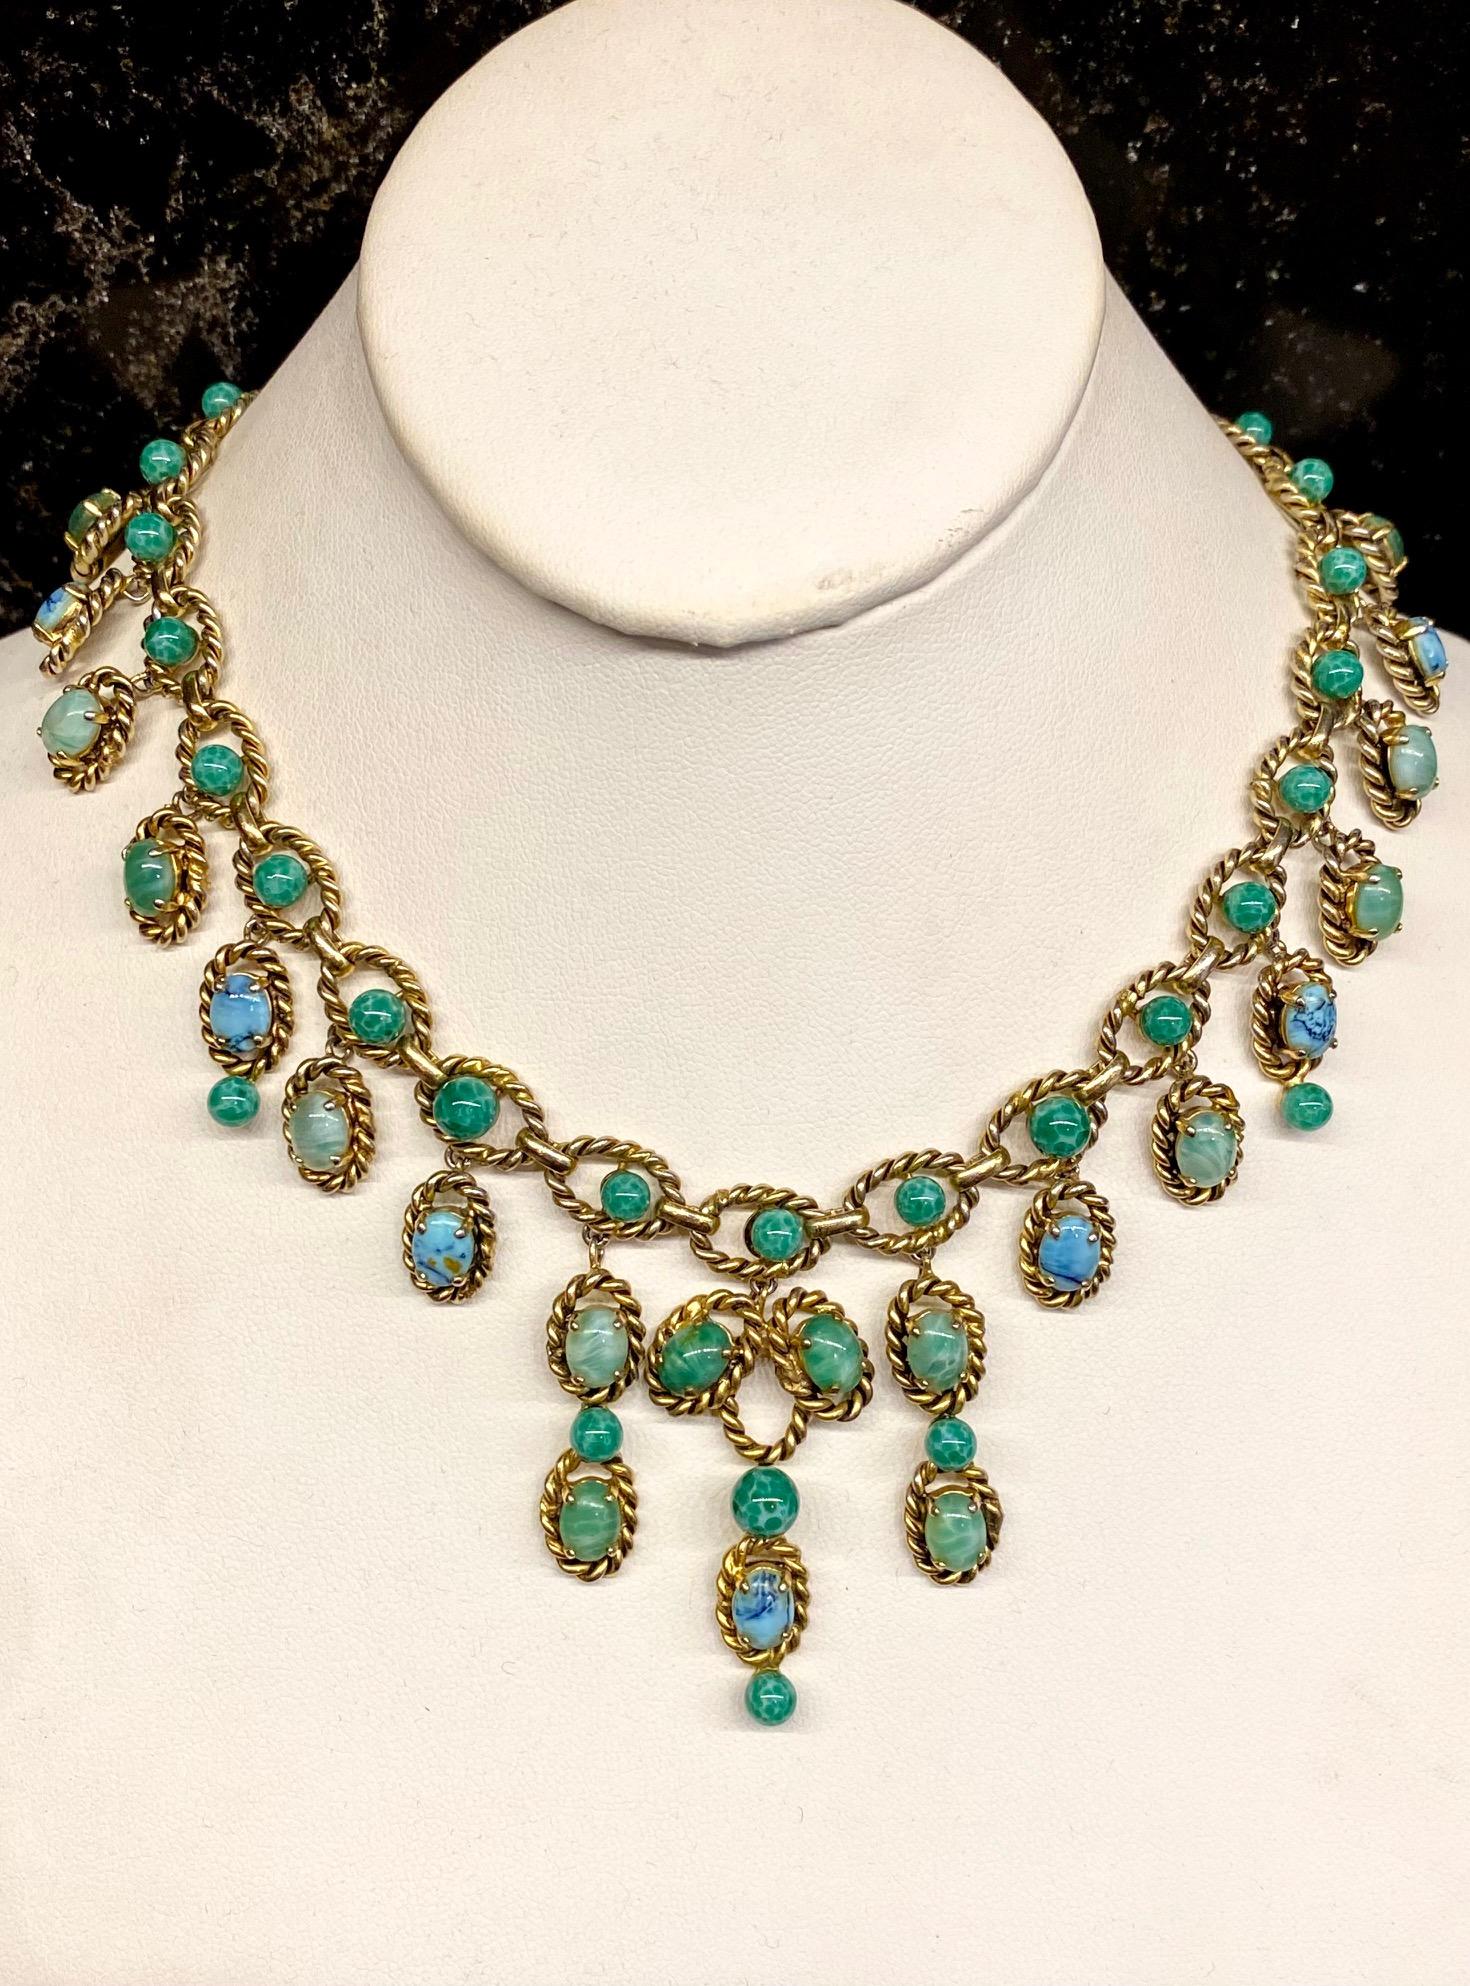 A stunning and rare Christian Dior necklace from 1963. The necklace was made by the company Henkel & Grosse' of Germany who began producing jewelry for Dior in 1955 and continues today. The necklace features oval gold rope twist links with an